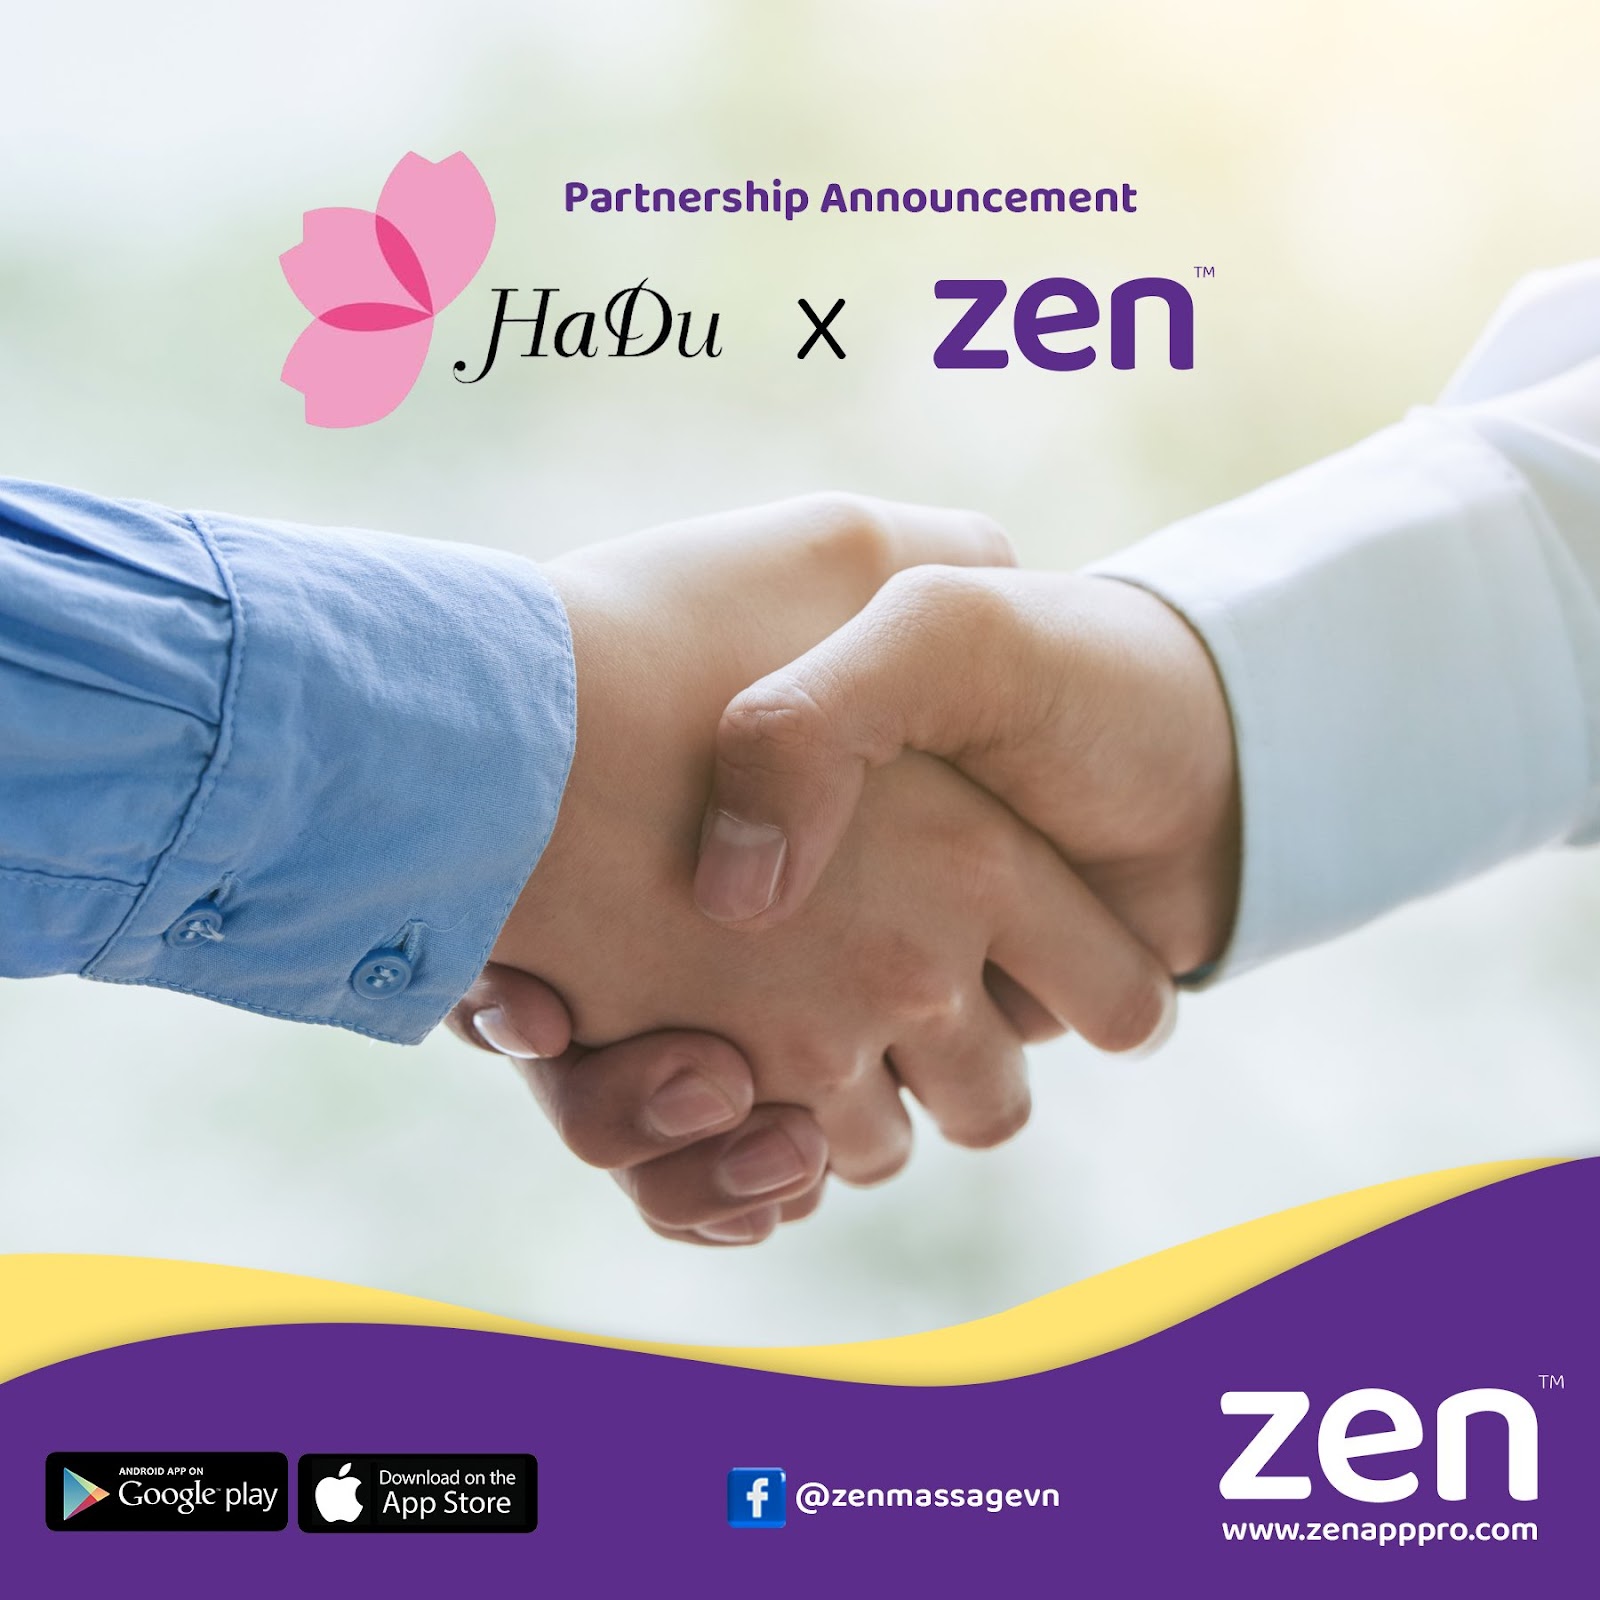 Zen partners with Hadu to provide professional training for massage therapists